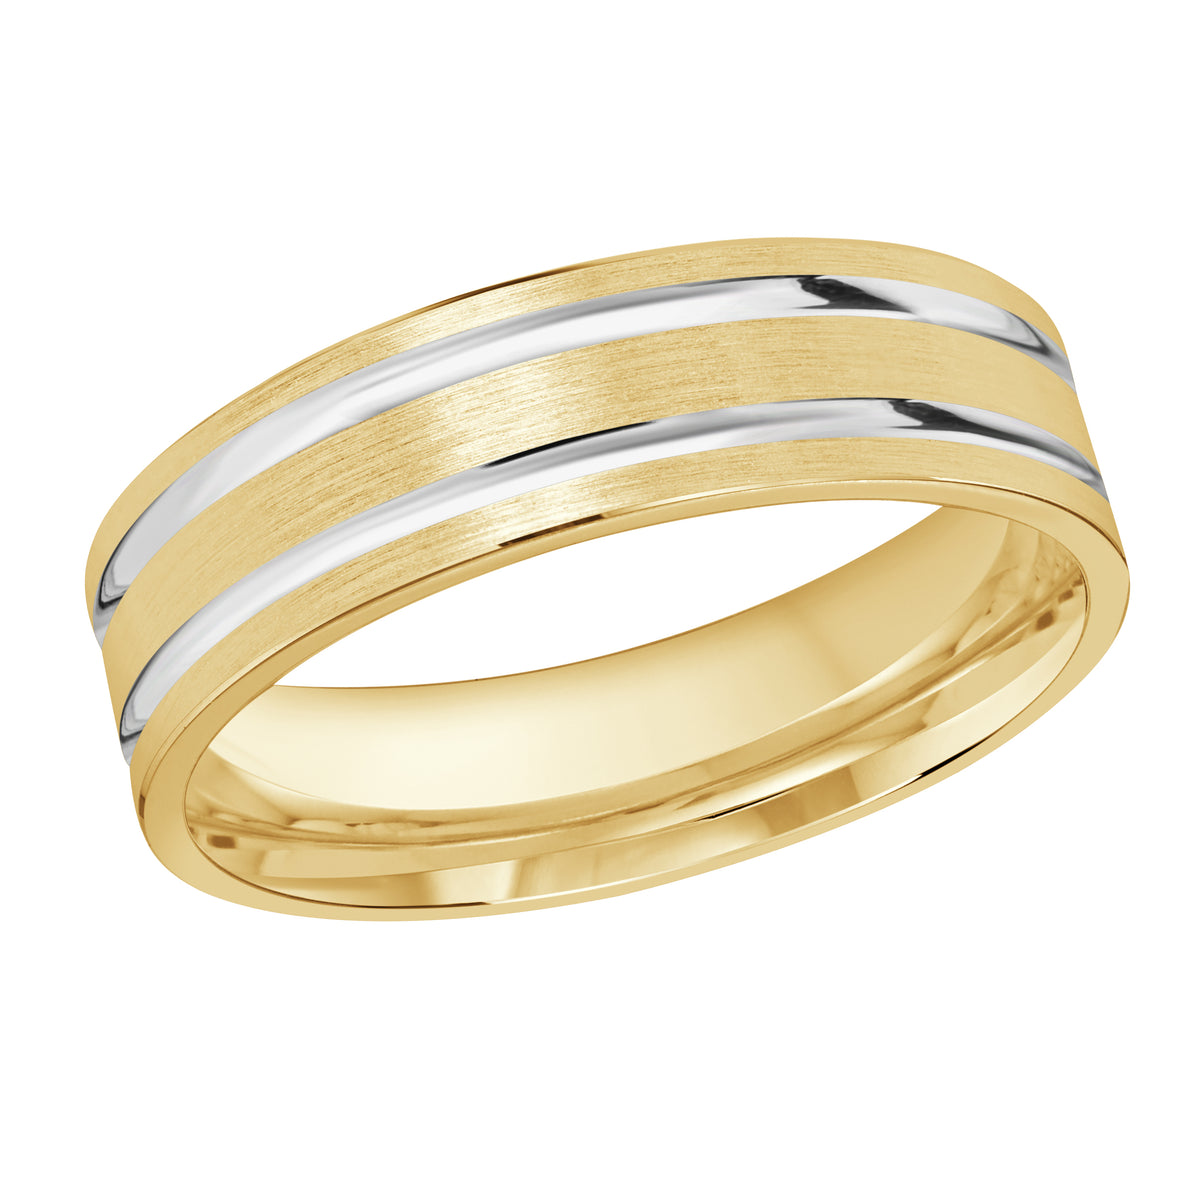 White and Yellow Gold Wedding Band